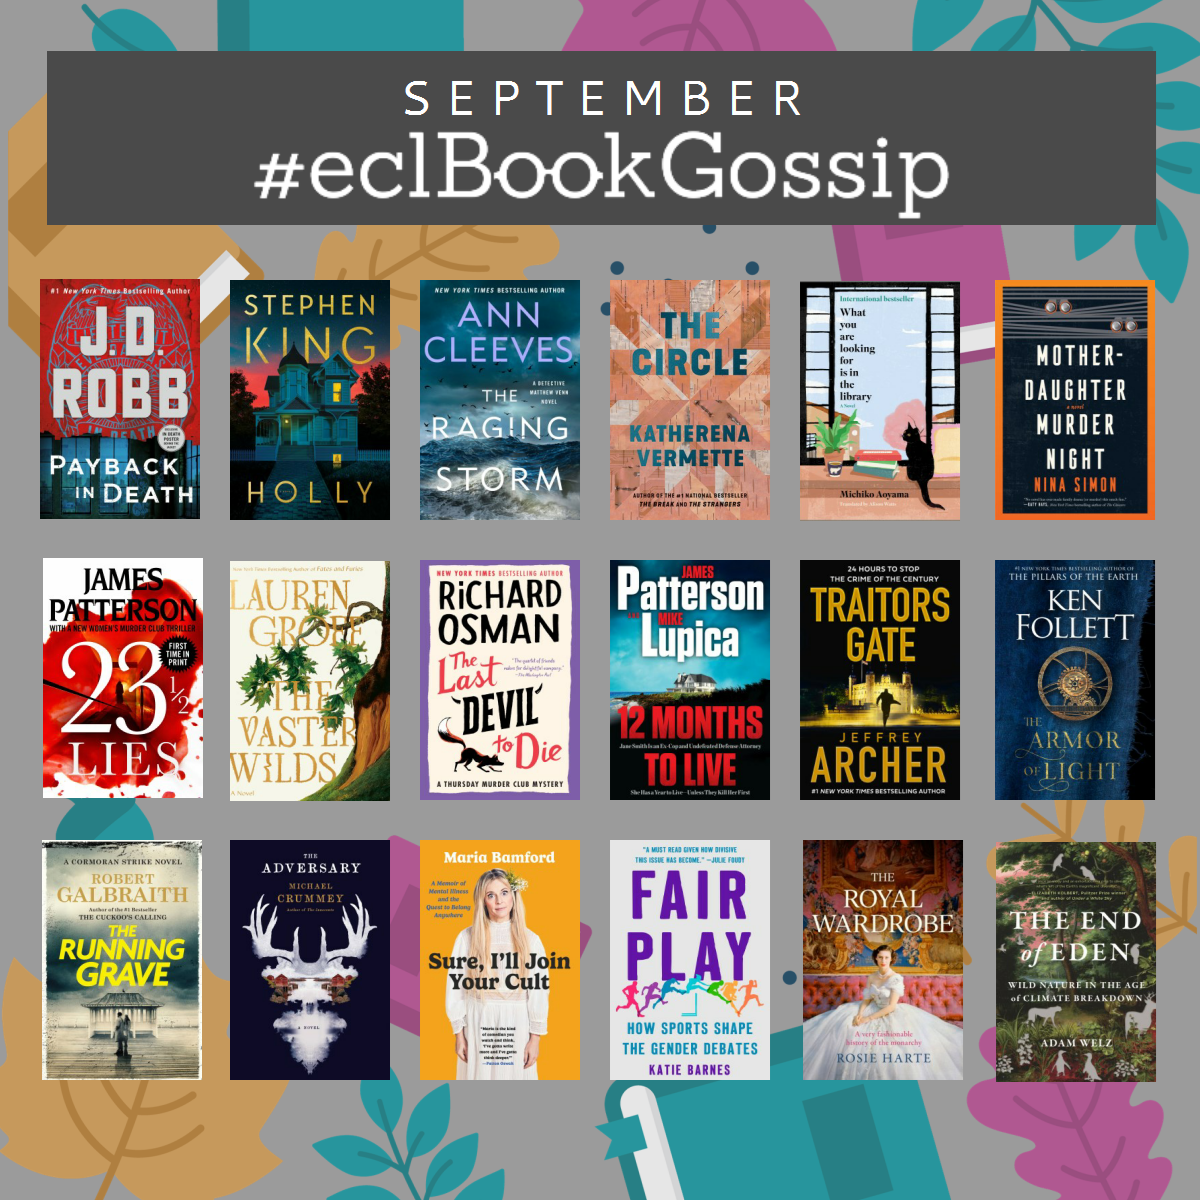 September #eclBookGossip with 18 book covers 